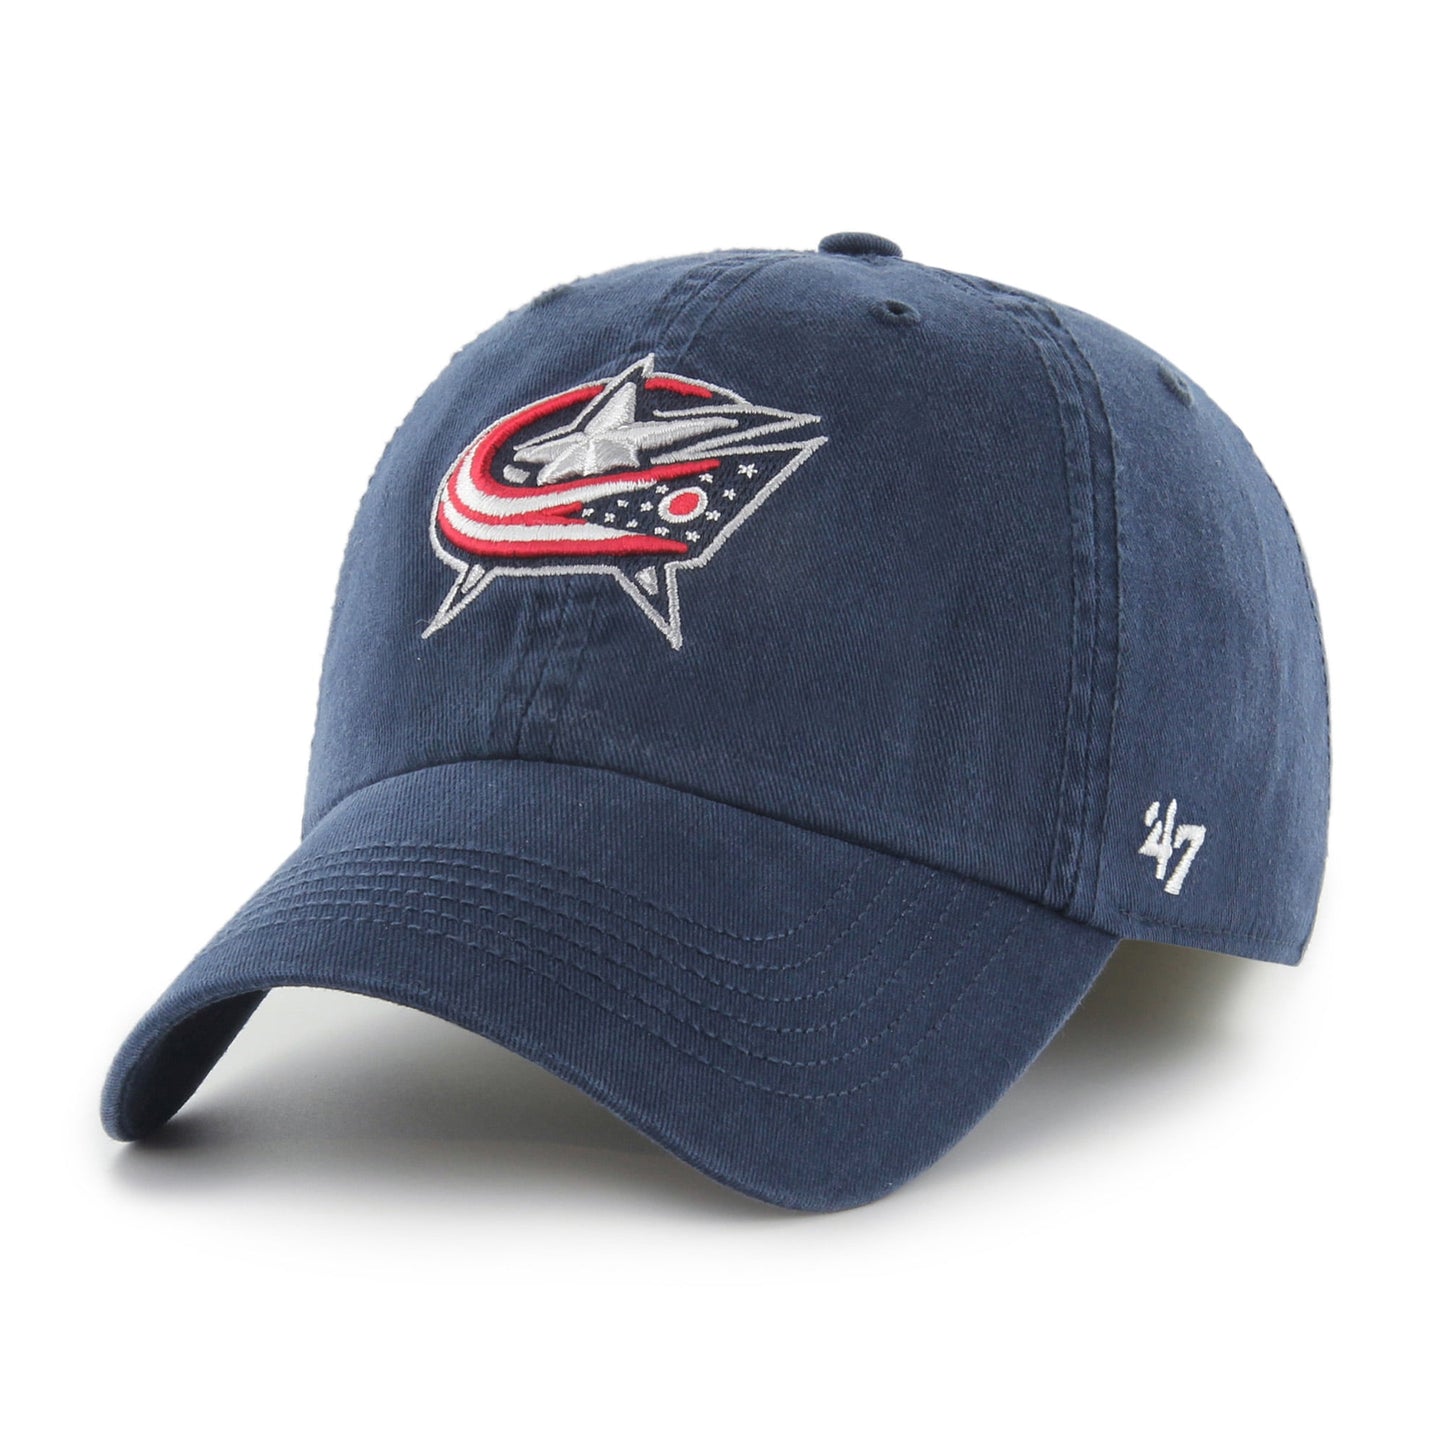 Men's '47 Navy Columbus Blue Jackets Classic Franchise Fitted Hat